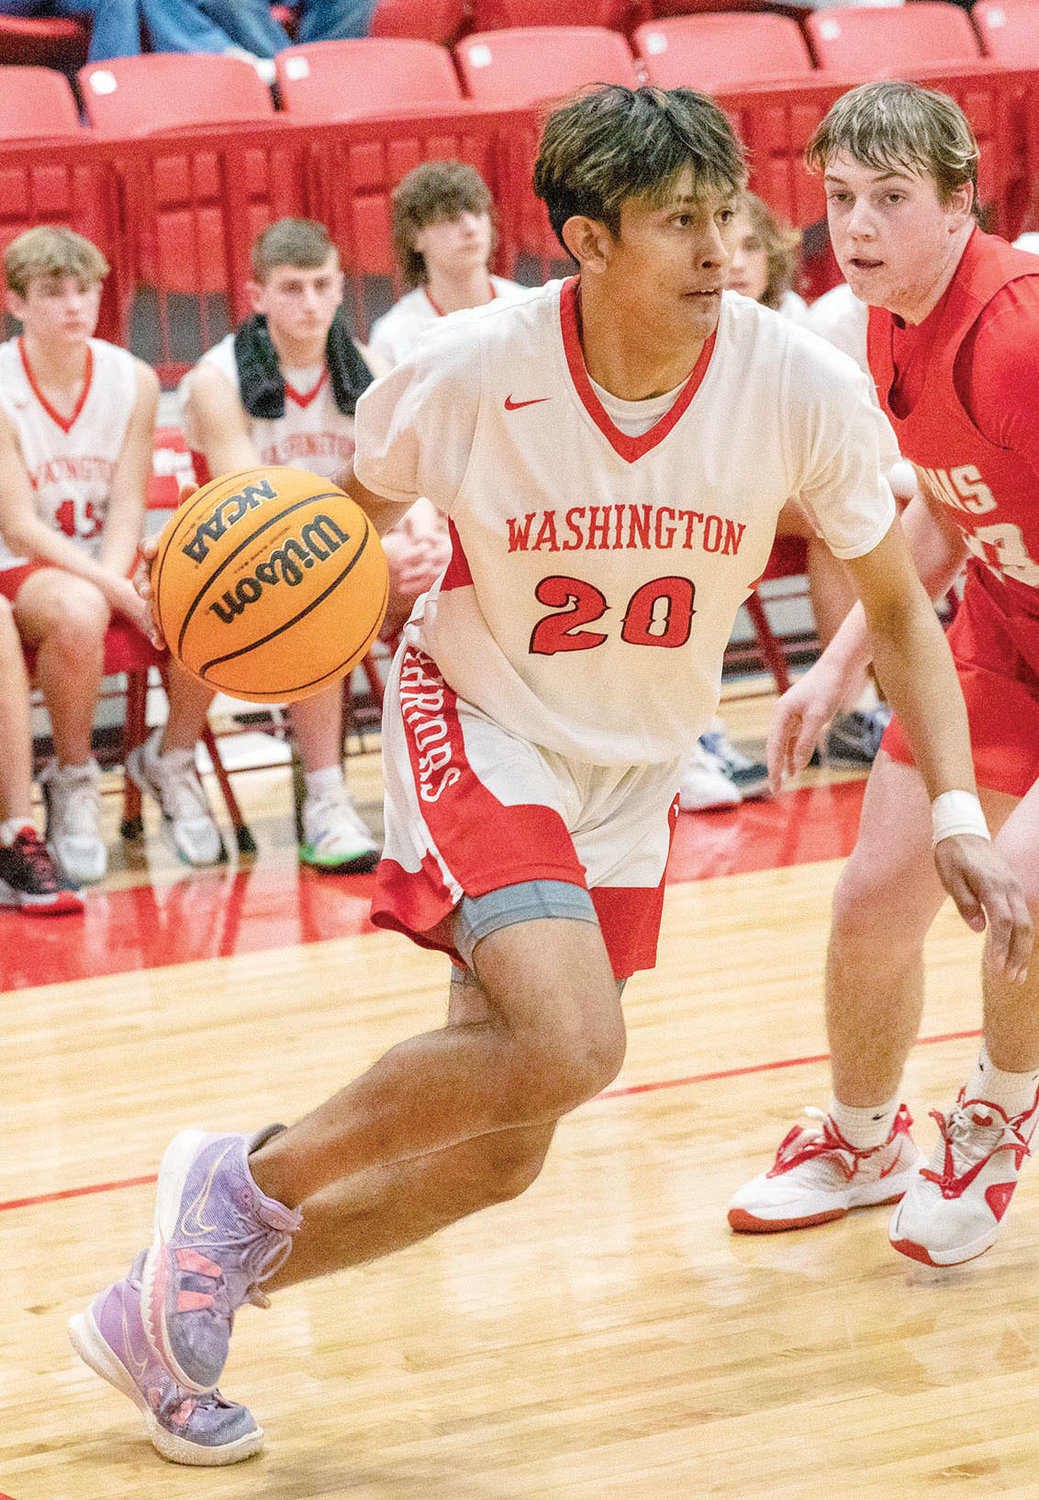 Washington senior Hector Quinonez drives to the bucket against Davis during the Warriors’ 57-49 win. Washington plays Chisholm on Saturday at 8 p.m. in the District tournament.